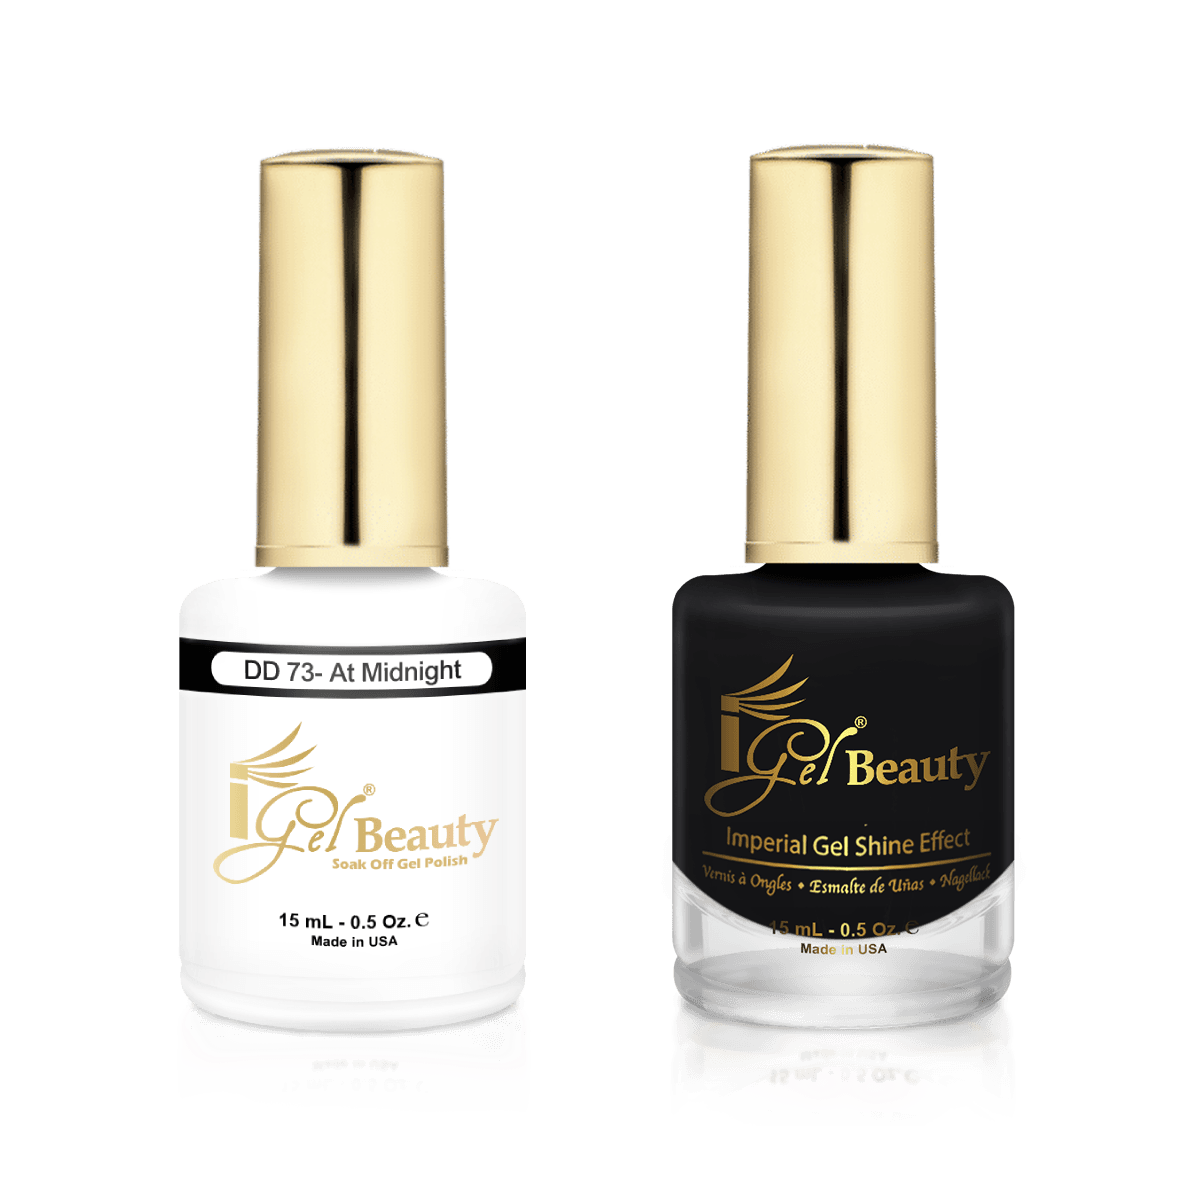 IGel Duo Gel Polish + Matching Nail Lacquer DD 73 AT MIDNIGHT